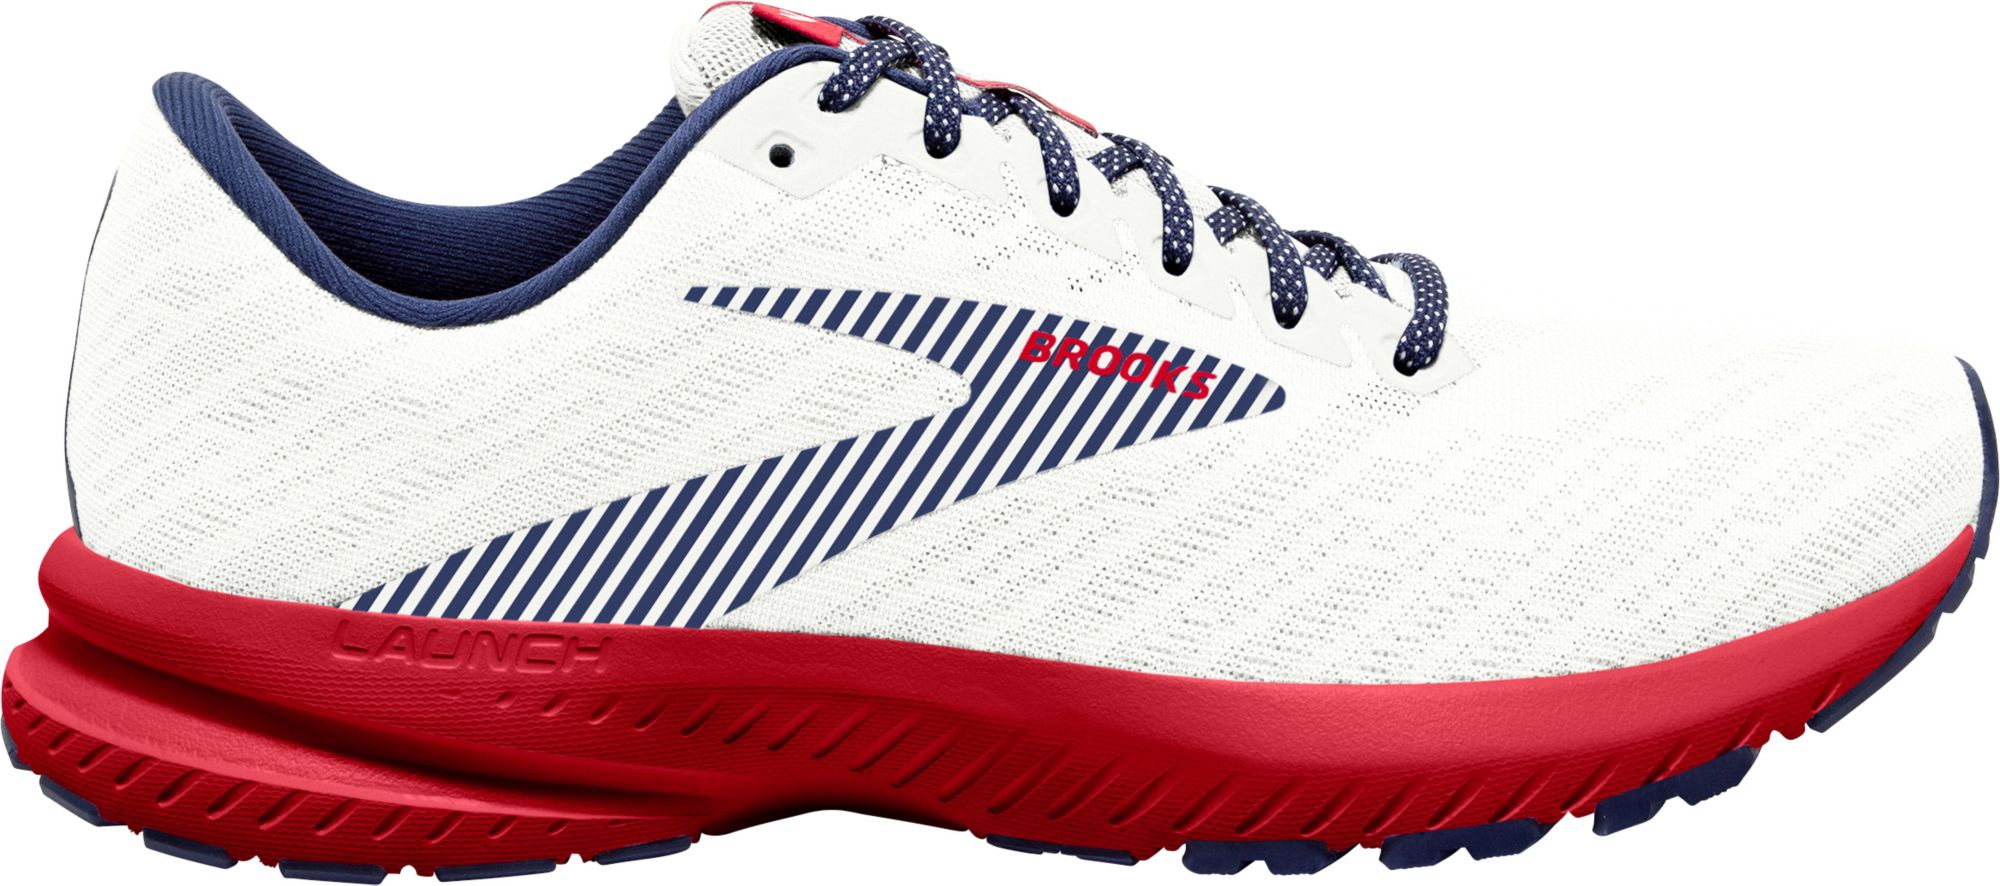 brooks launch 5 red white blue womens